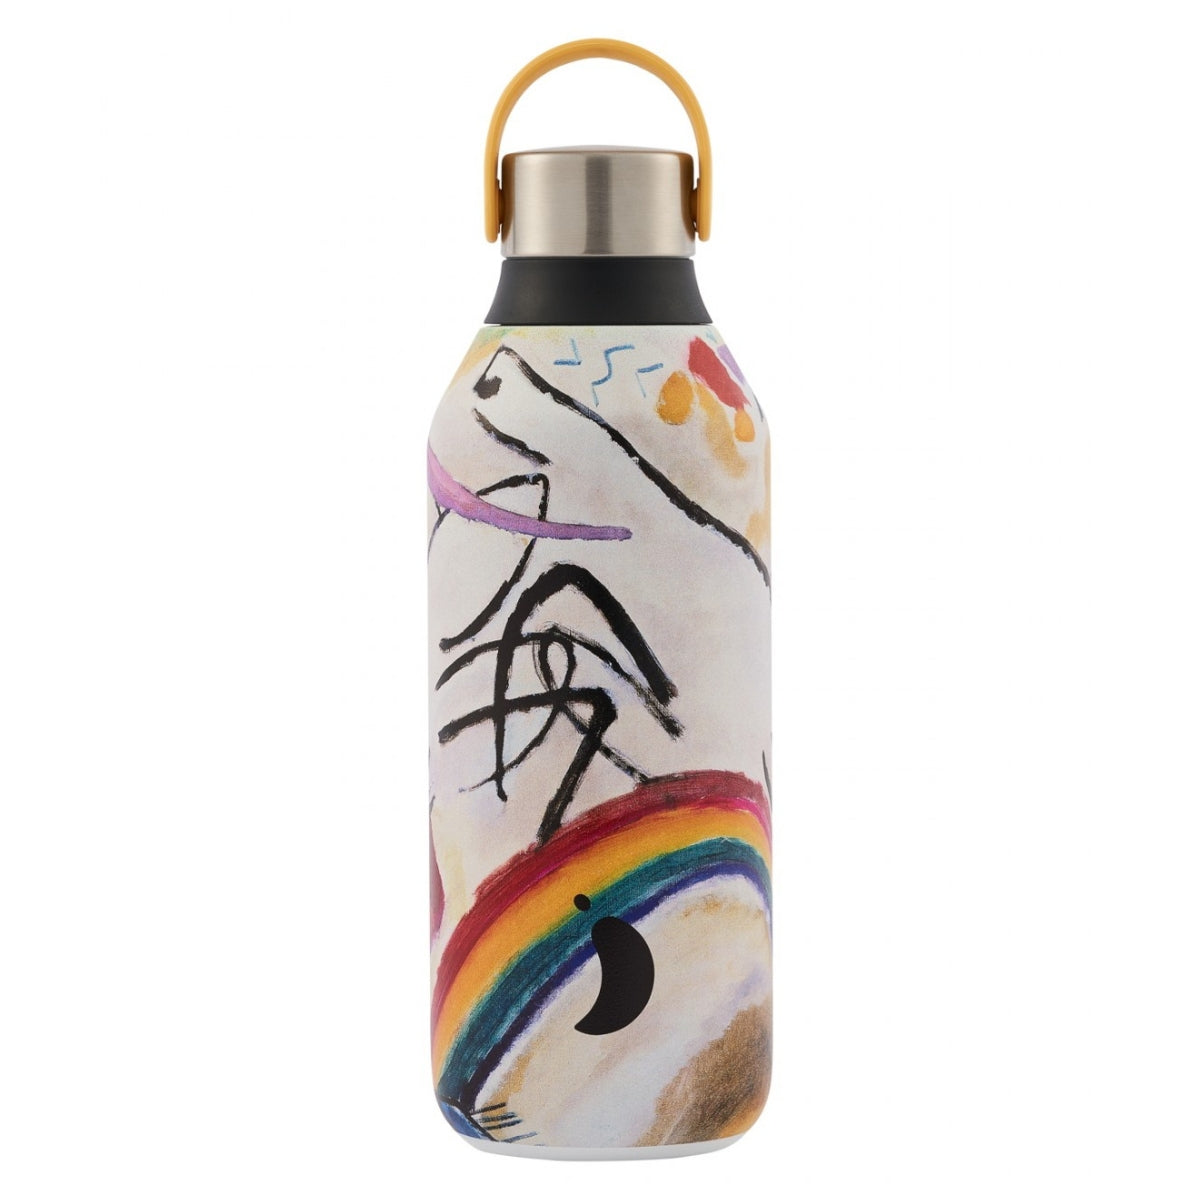 chillys-series-2-mpoukali-thermos-wassily-kandinsky-500ml